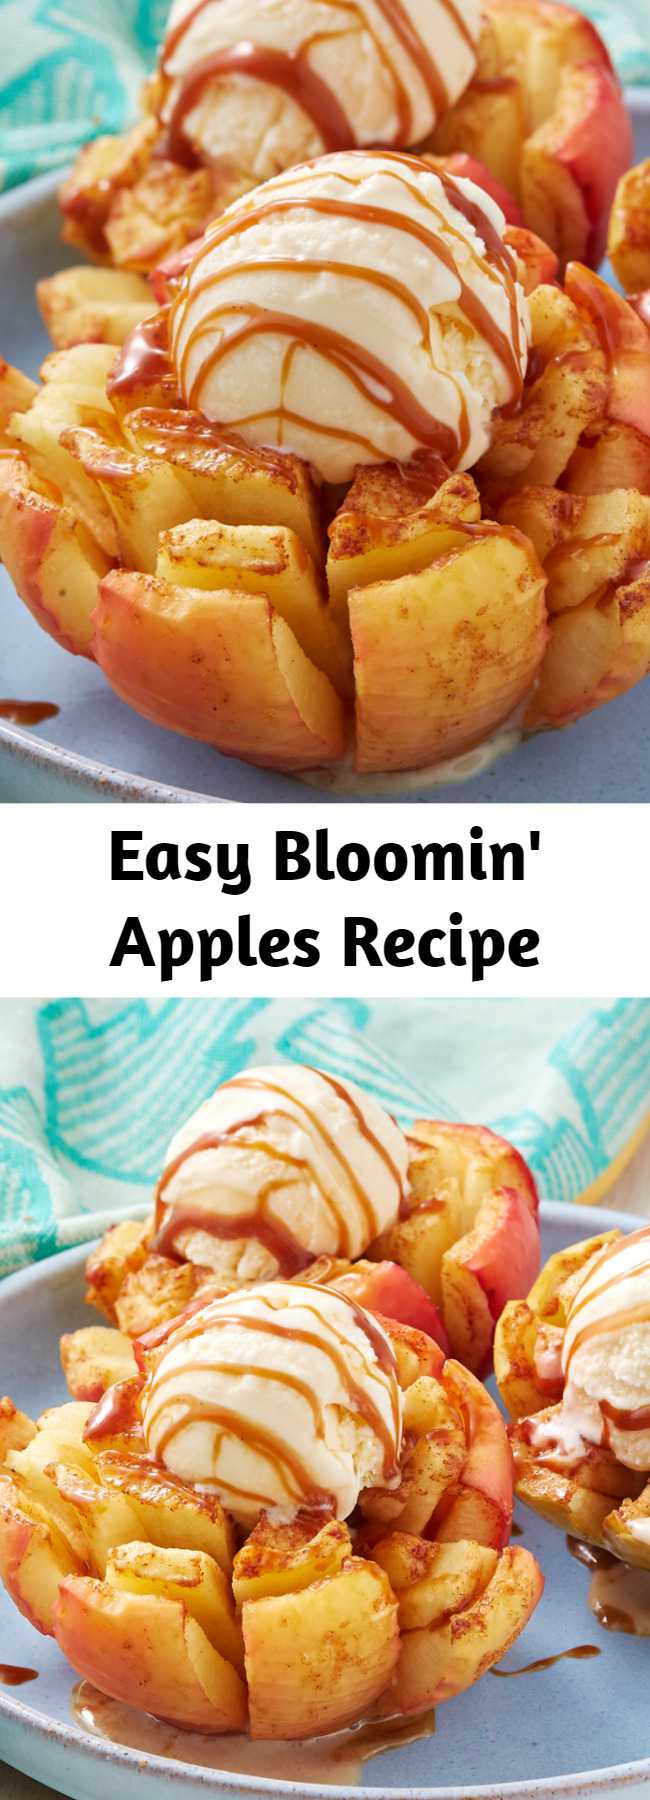 Easy Bloomin' Apples Recipe - We took inspo from the ever popular bloomin' onion and made a just as fun dessert. Though these finished bloomin' apples look insane, they're actually quite easy to make. Because apples can turn brown really quickly, you'll want to brush them with butter and get them in the oven pretty quickly after slicing them. If you want to take your time, squeeze lemon juice all over the cut side to prevent browning. These are also so fun to make in the air fryer! 